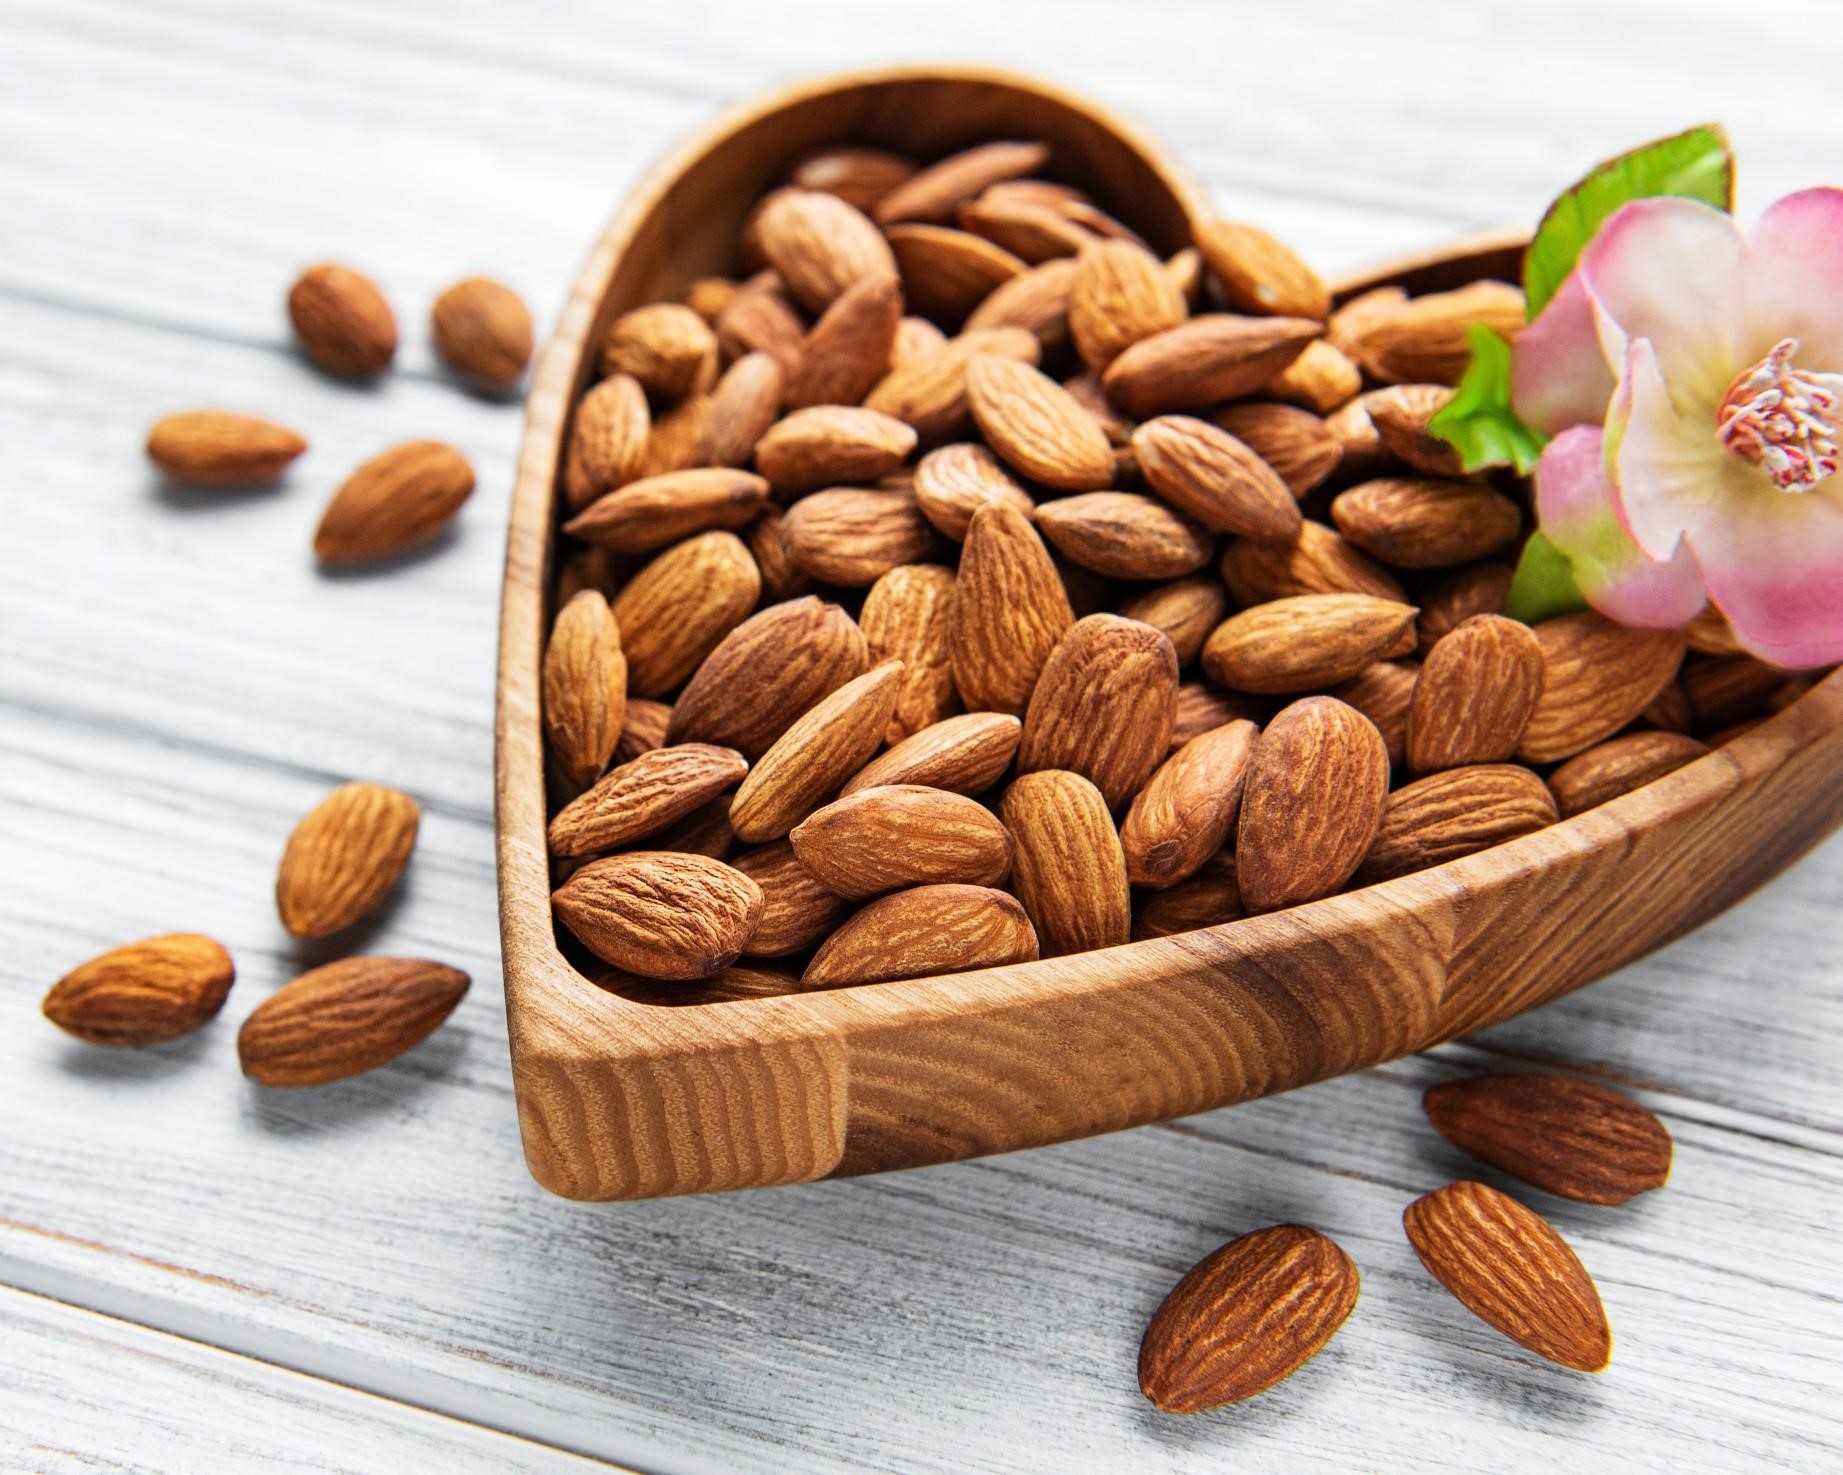 Almonds - Good Food for the Teeth